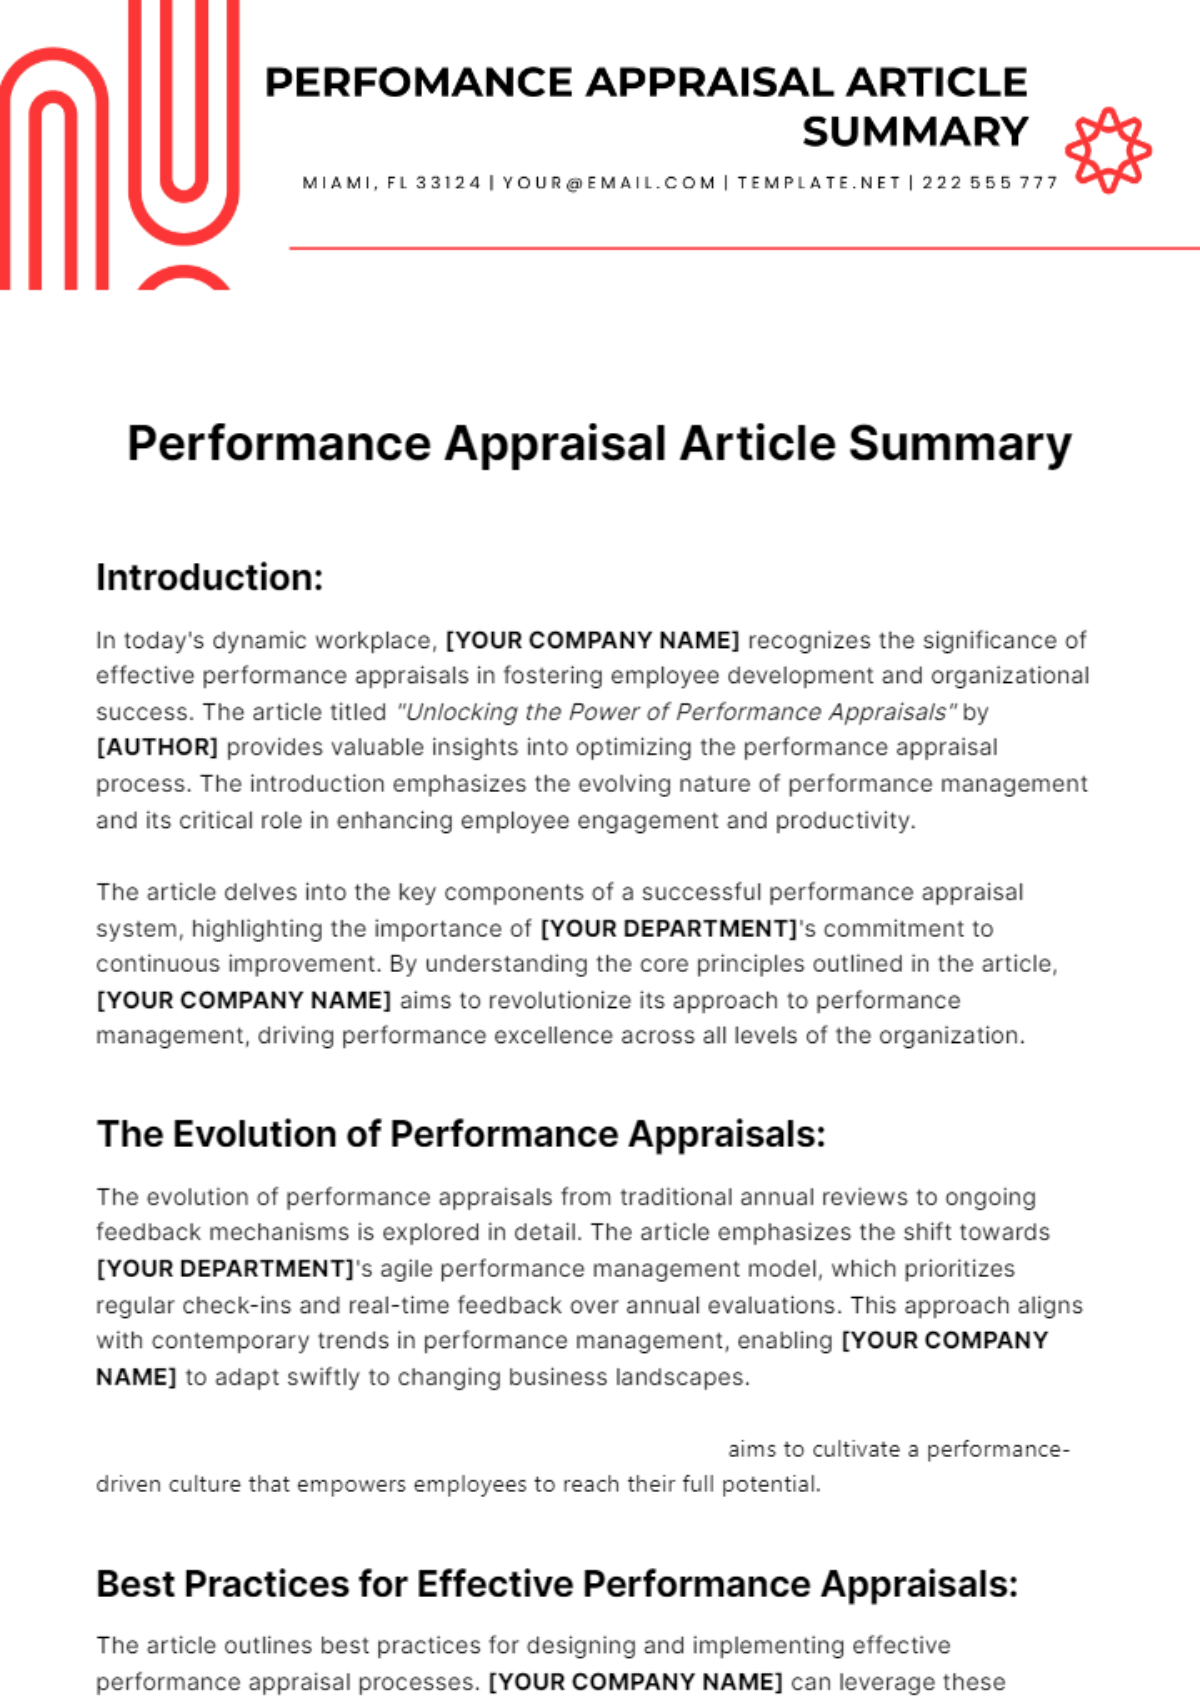 Free Performance Appraisal Article Summary Template